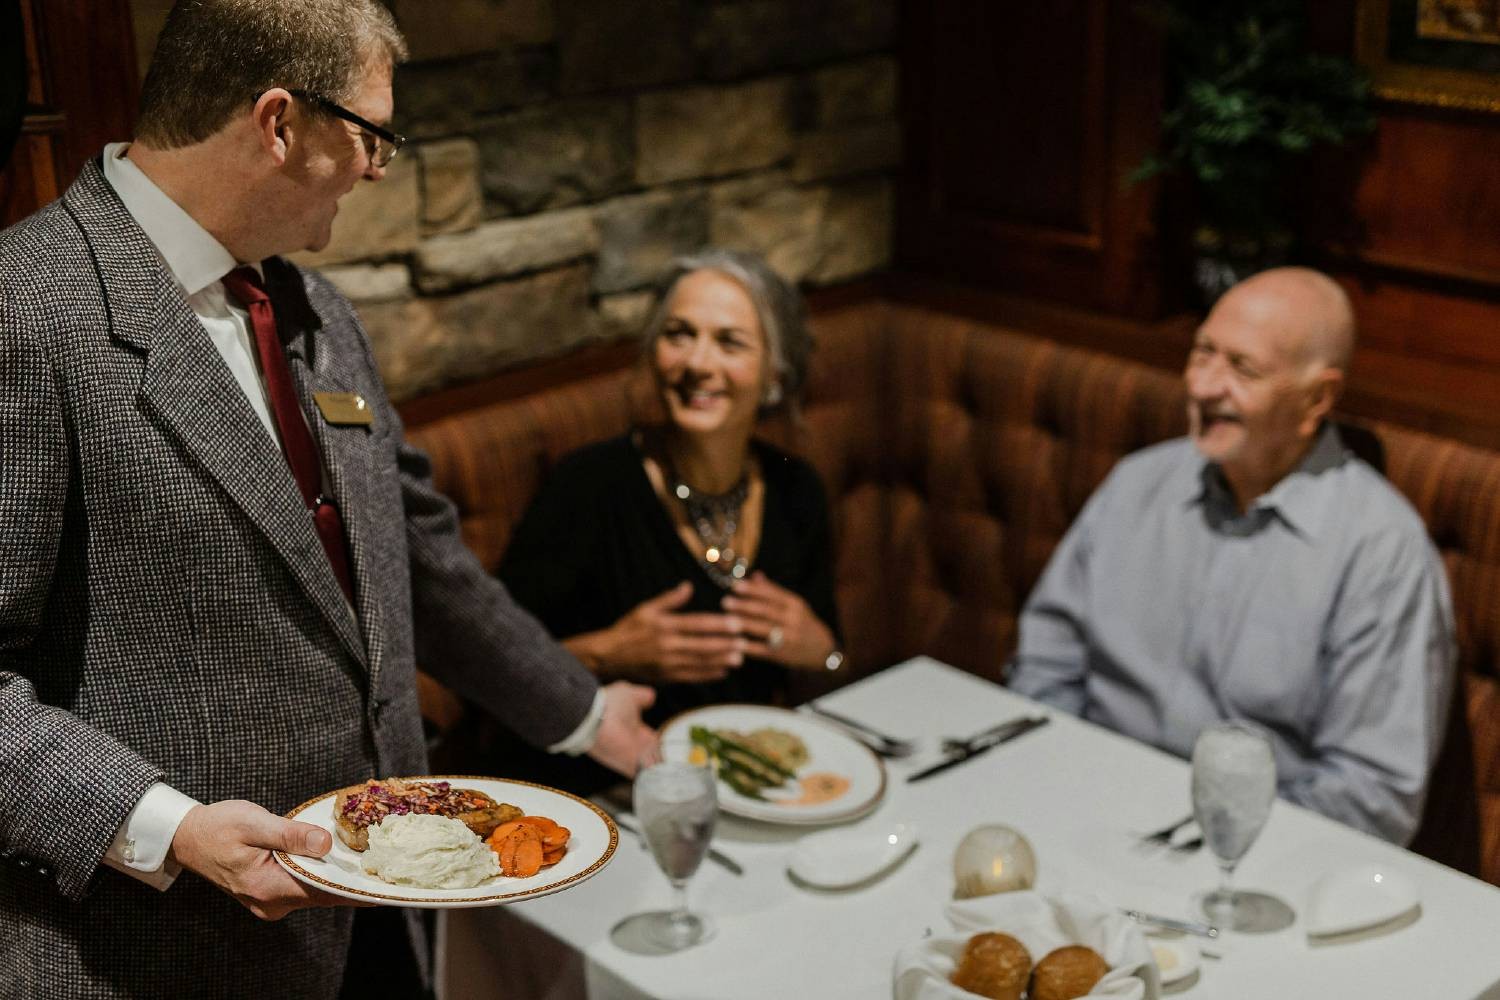 Residents may choose to dine at any of our four on-site restaurants. The menu rotates regularly for 120+ weekly options!